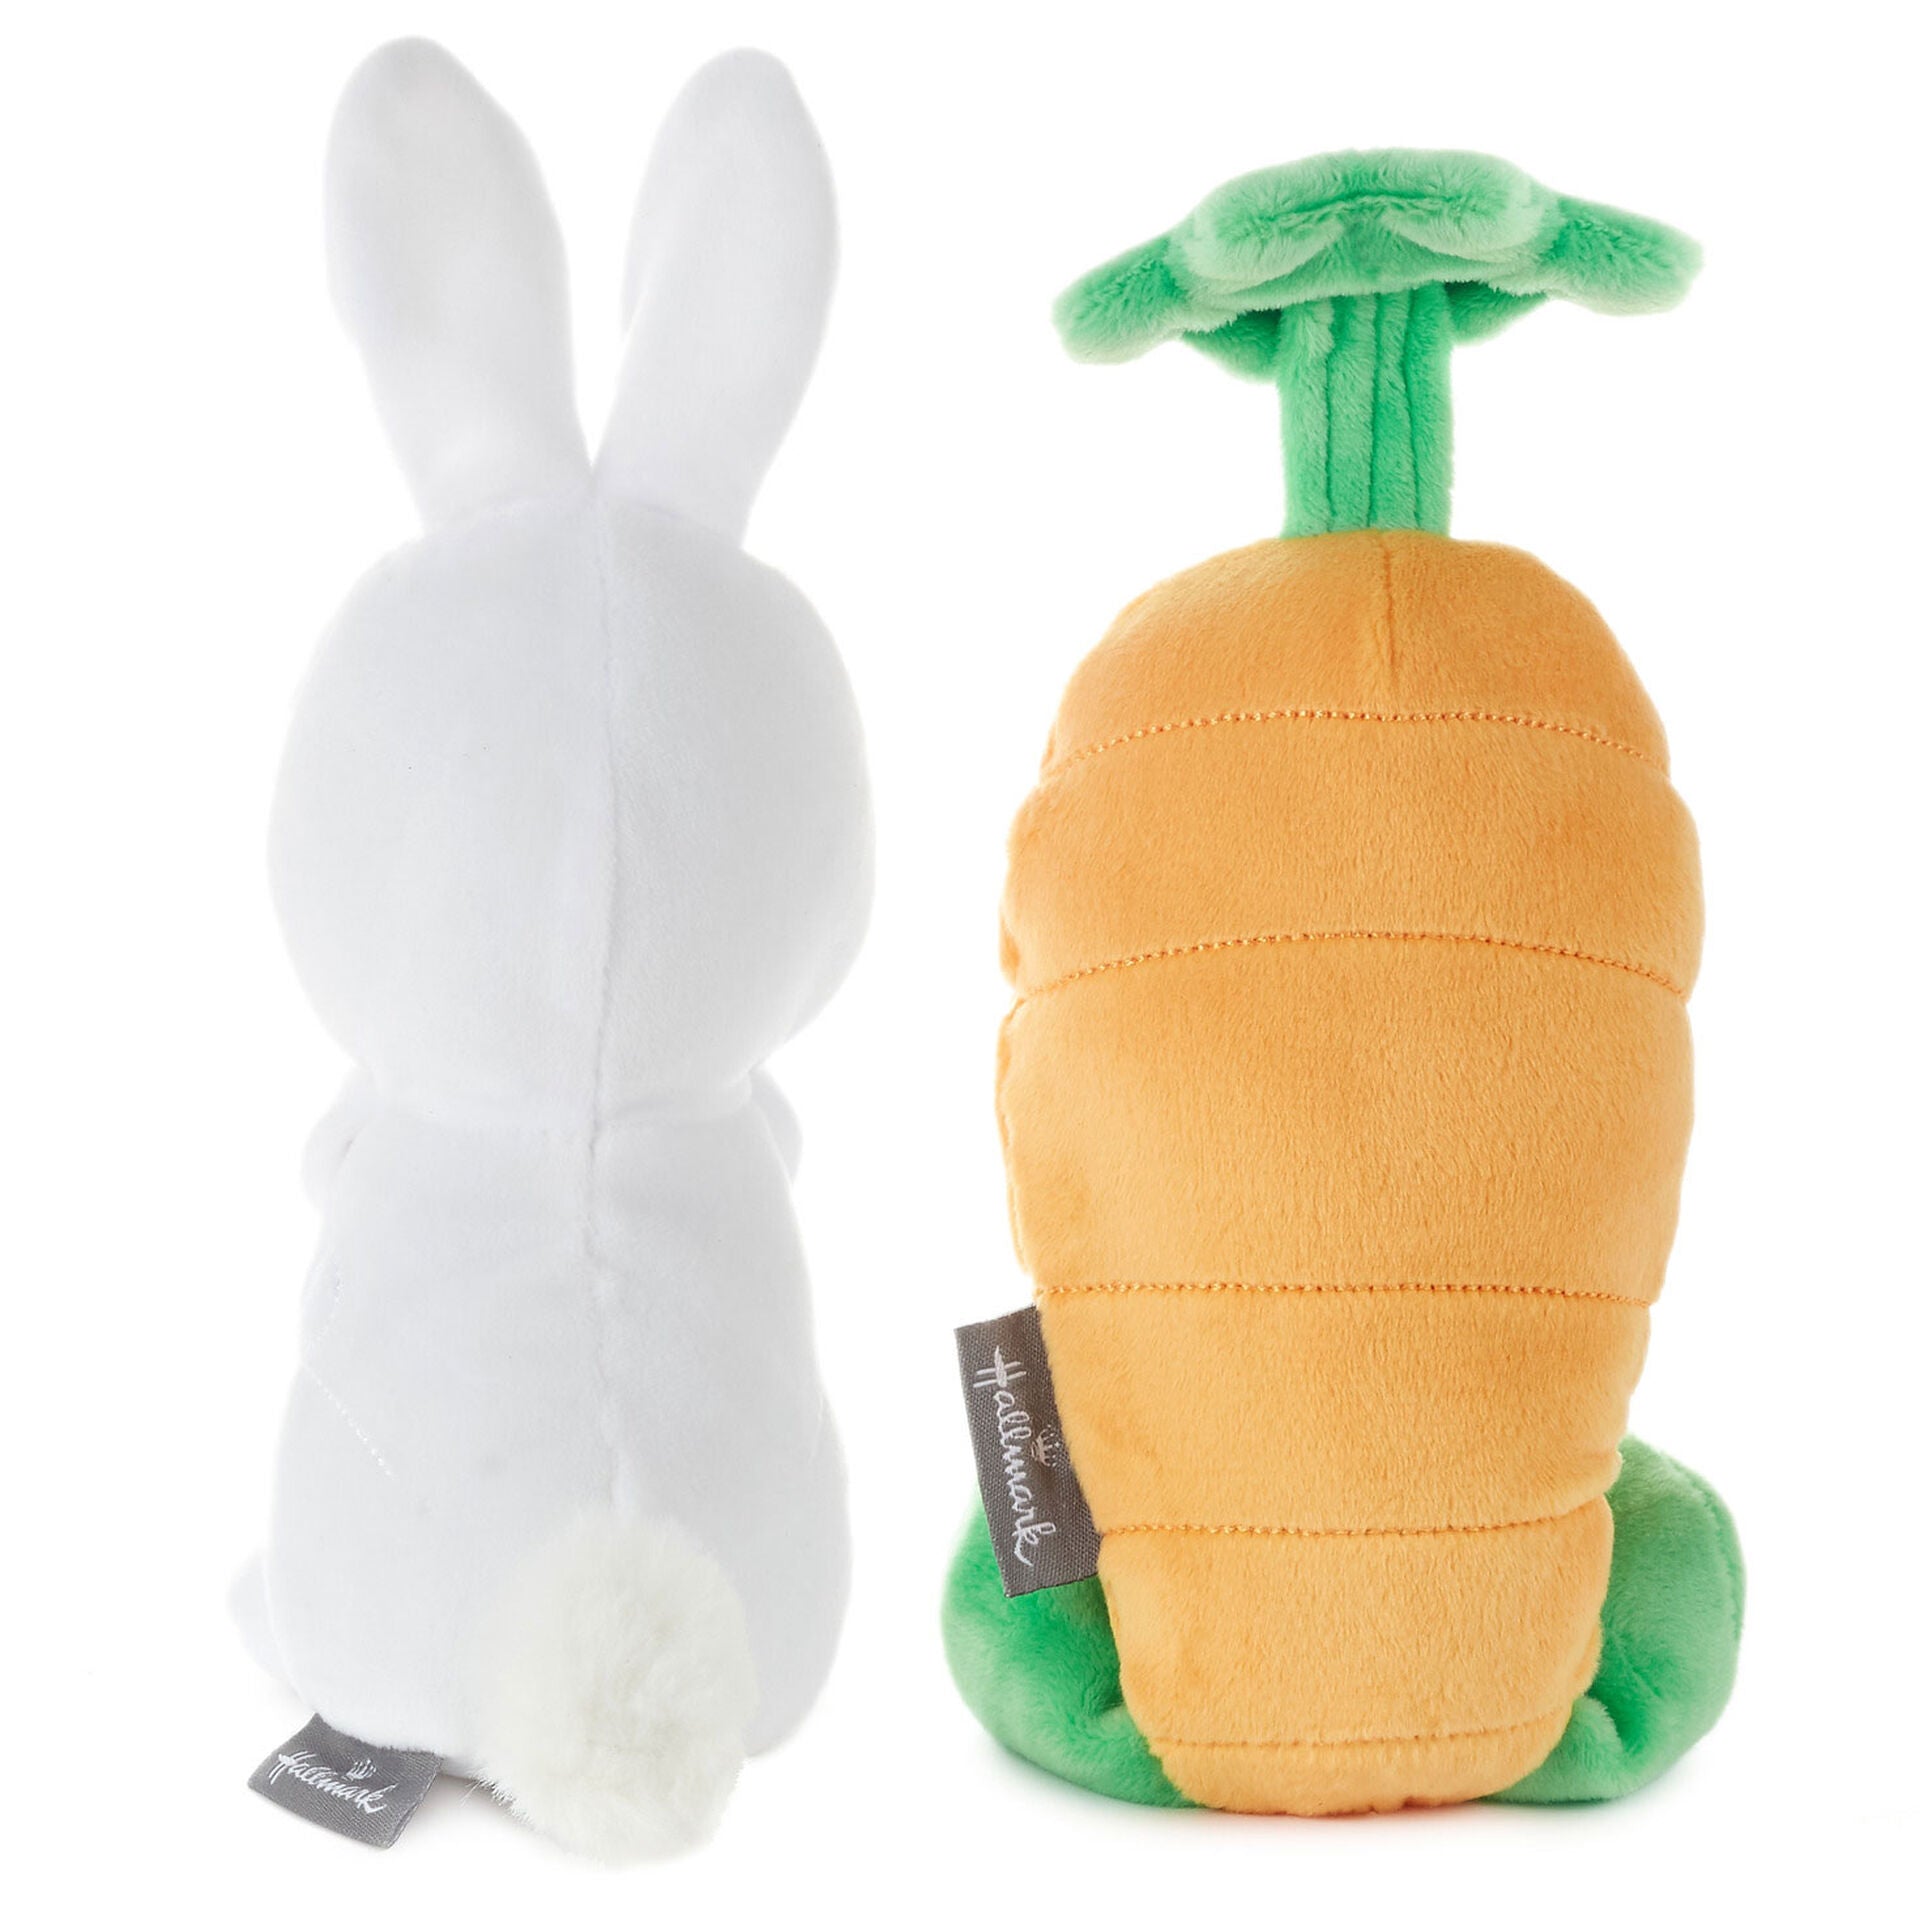 Better Together Bunny and Carrot Magnetic Plush Pair, 8"